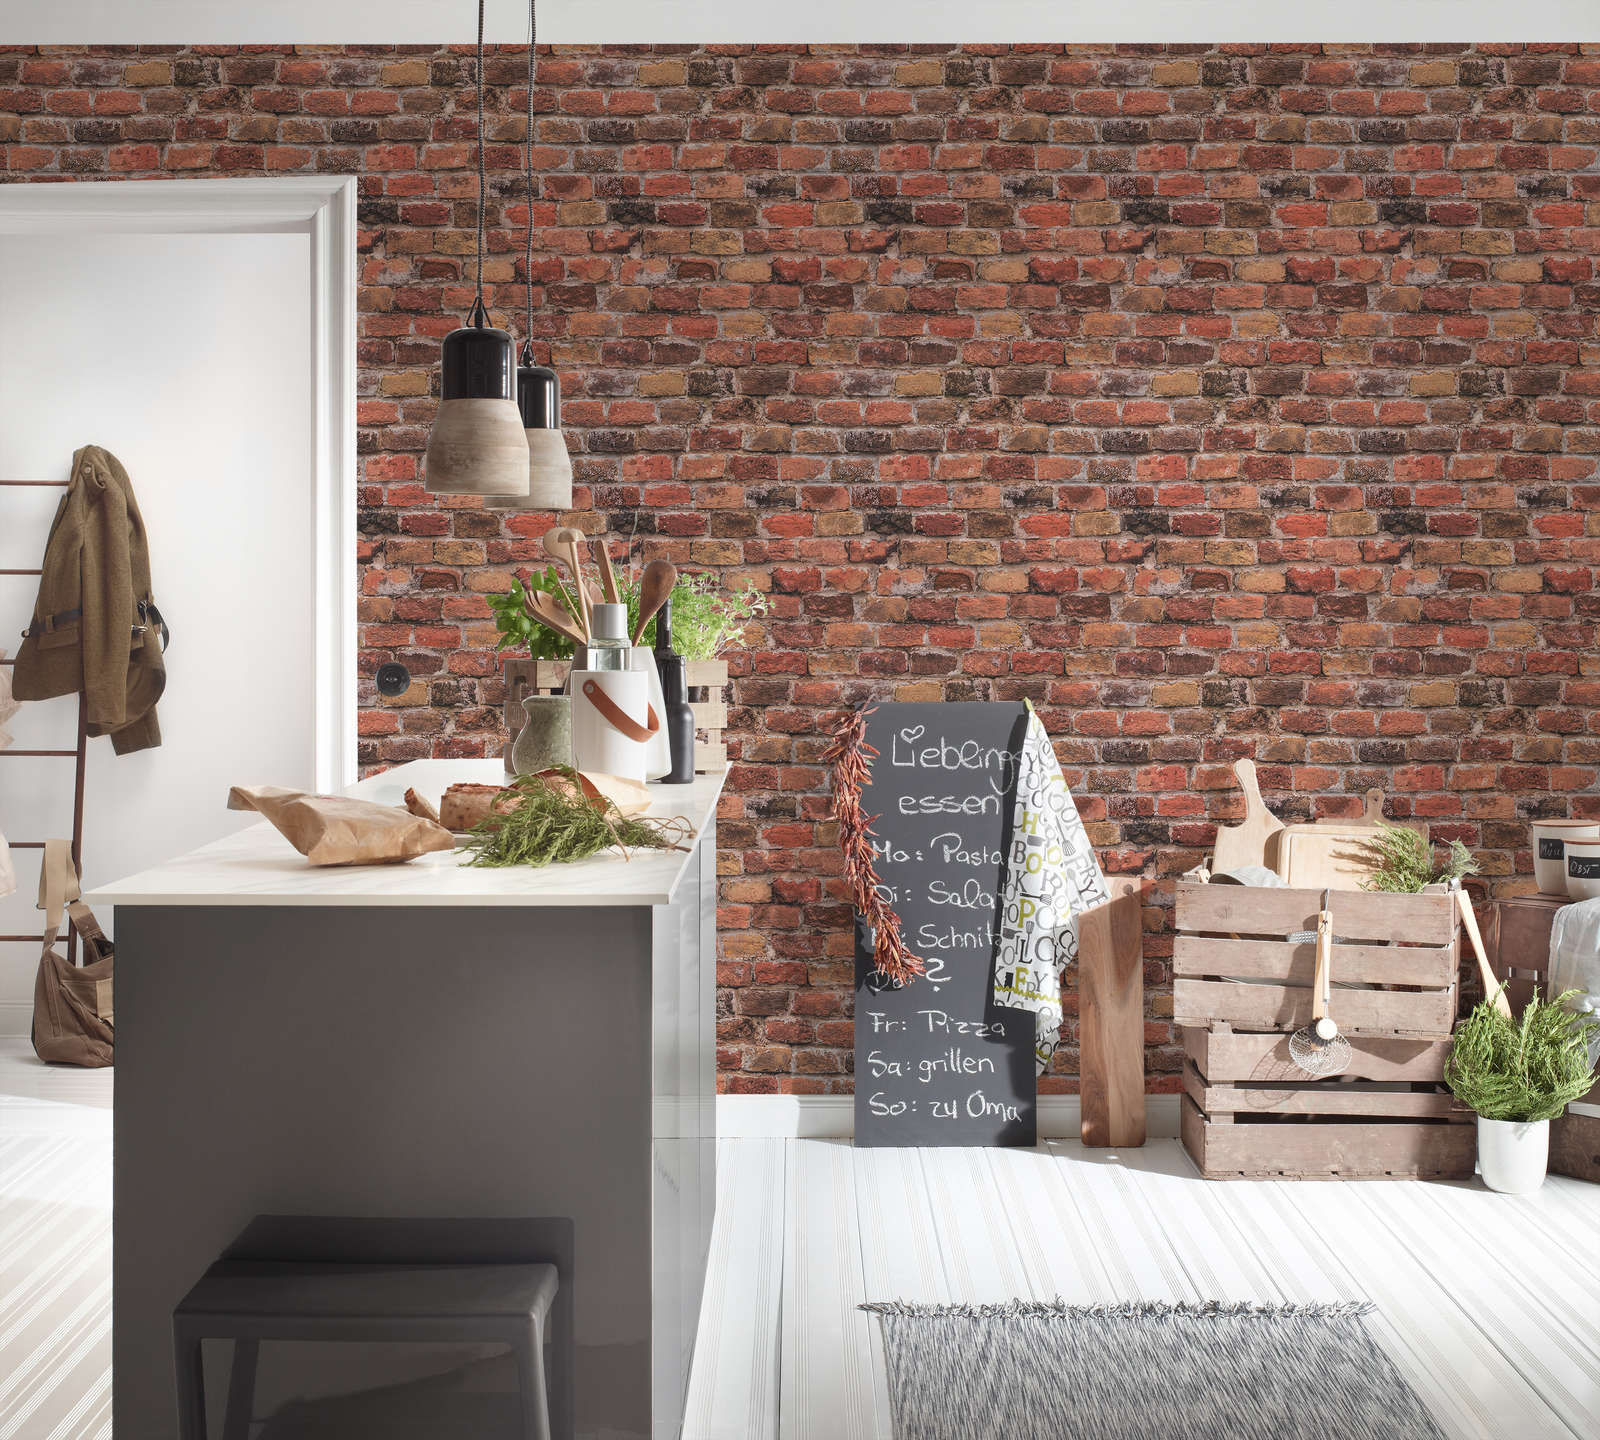             Non-woven wallpaper with natural stone look - red, orange, brown
        